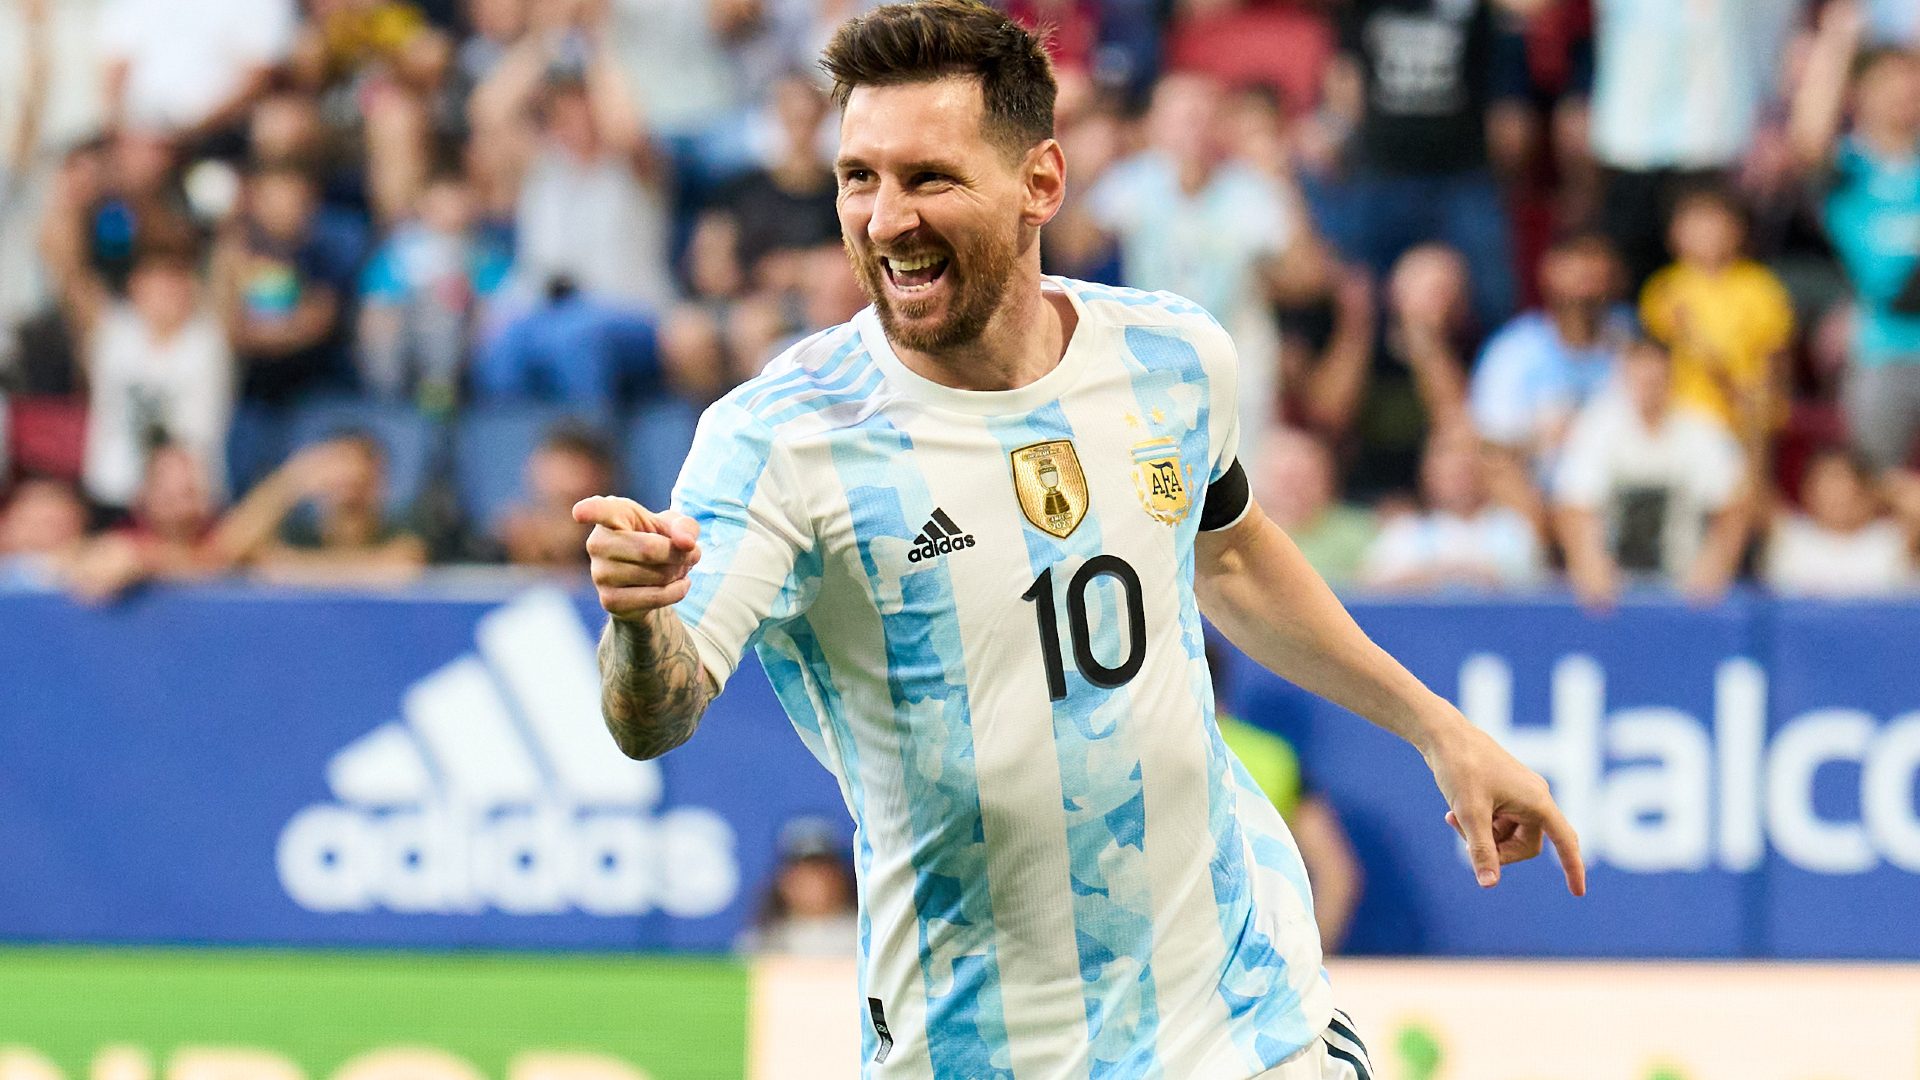 Messi to decide future after 2022 World Cup